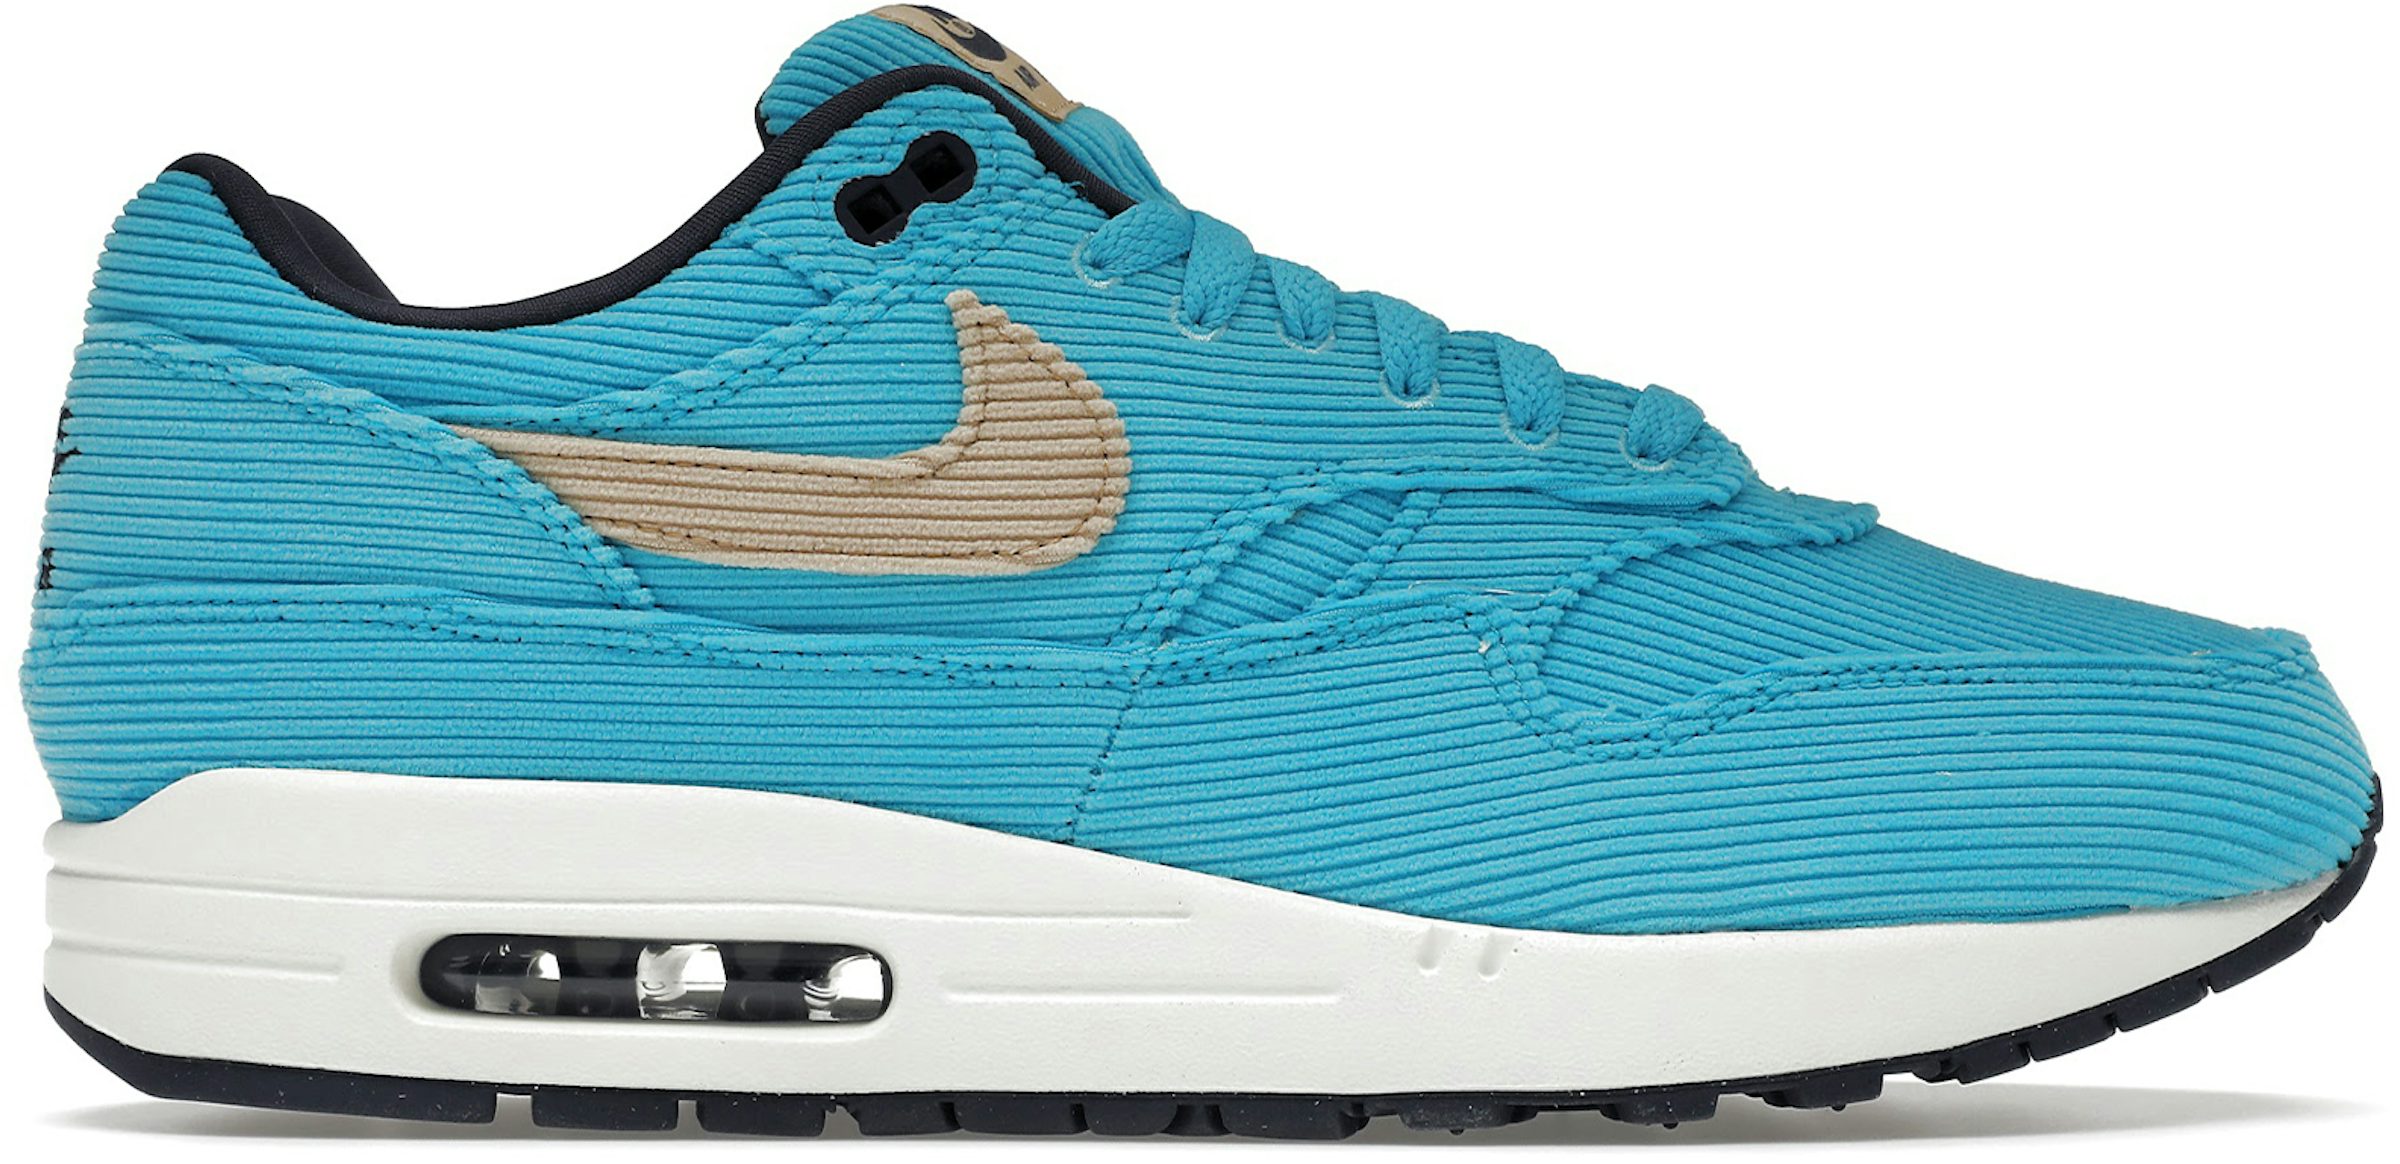 The Nike Air Max 1 OG Blue – 8&9 Clothing Co.